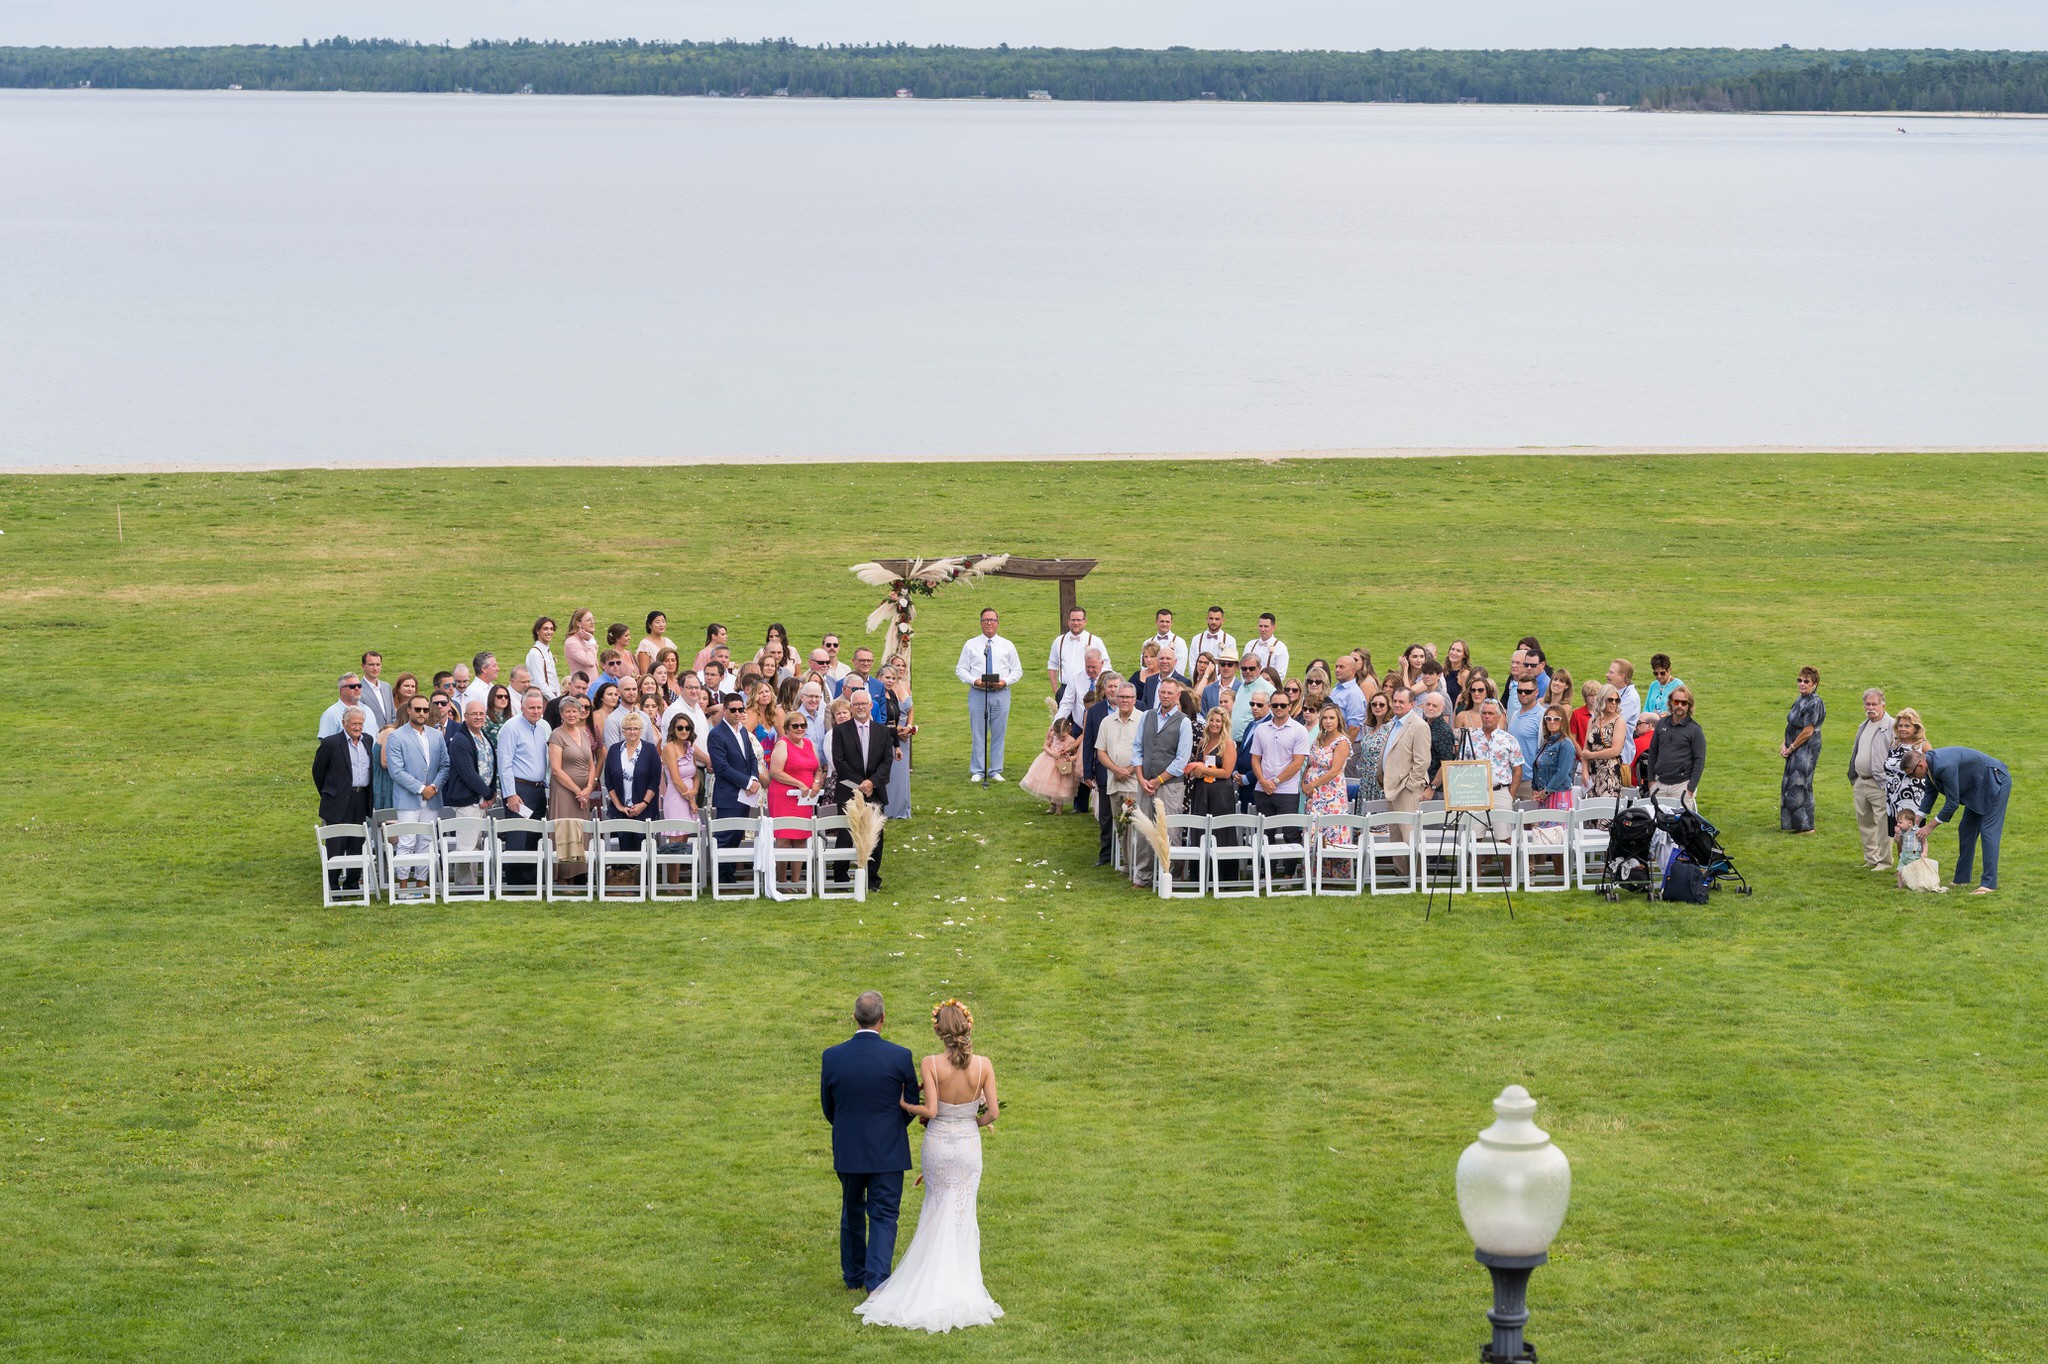 An aerial view of a bride walking toward her Mission Point Resort wedding ceremony on Mackinac Island.